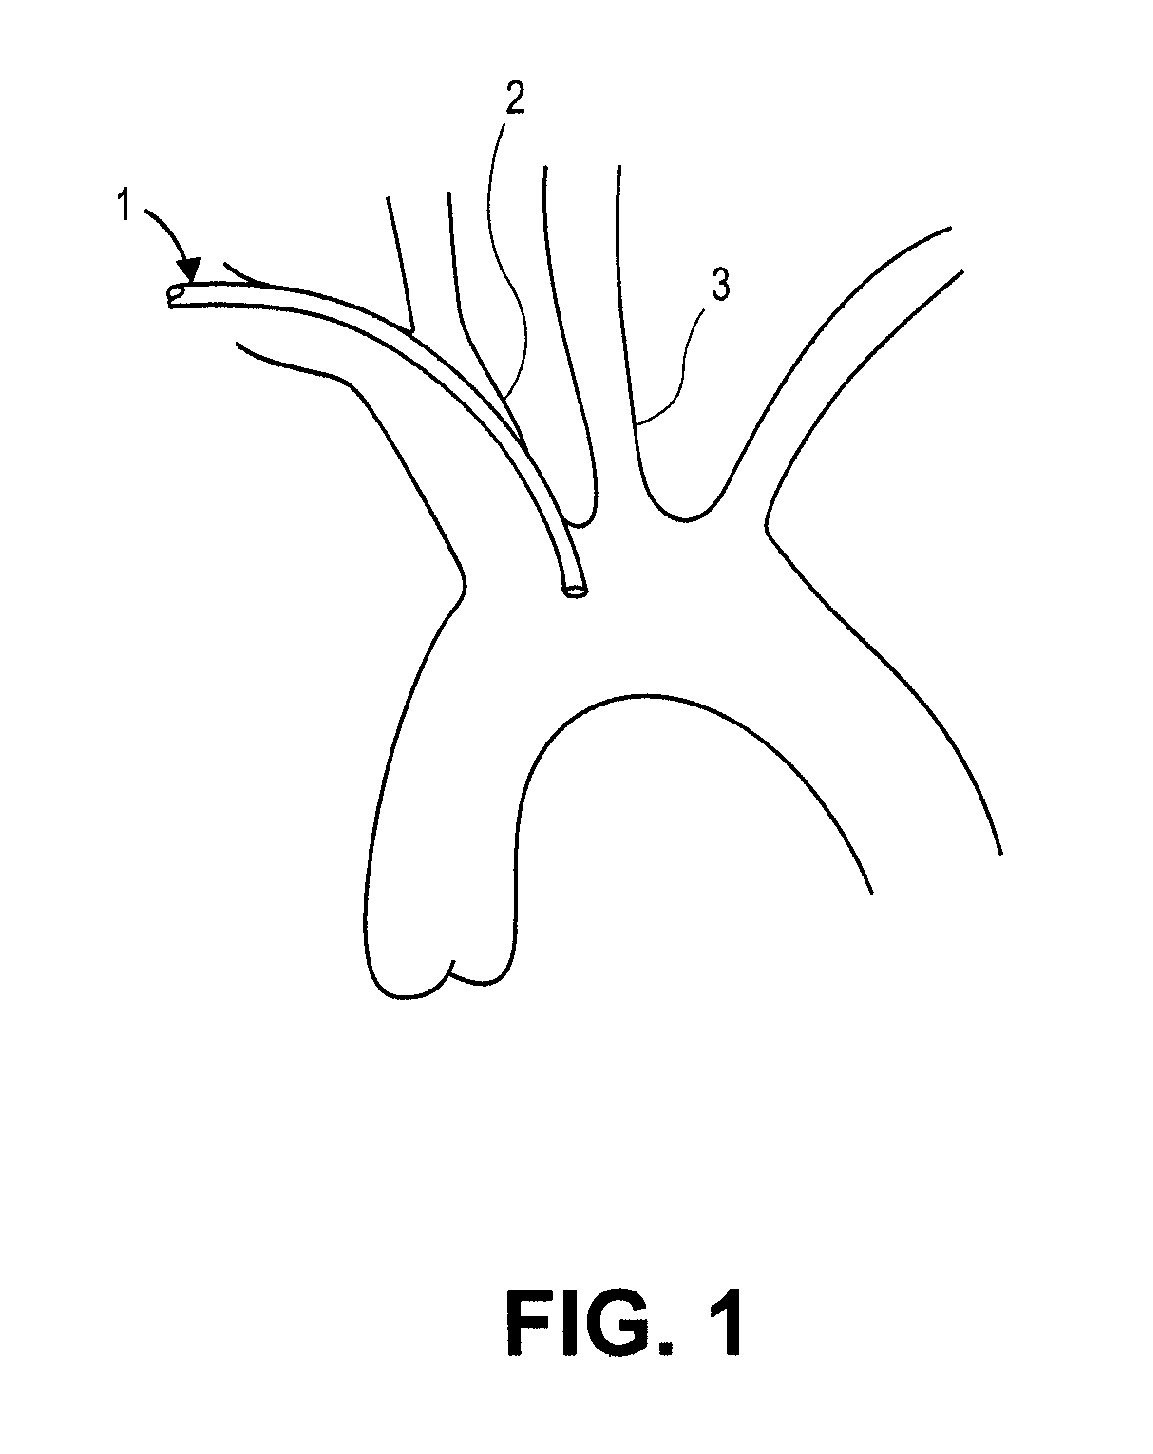 Intravascular blood filters and methods of use